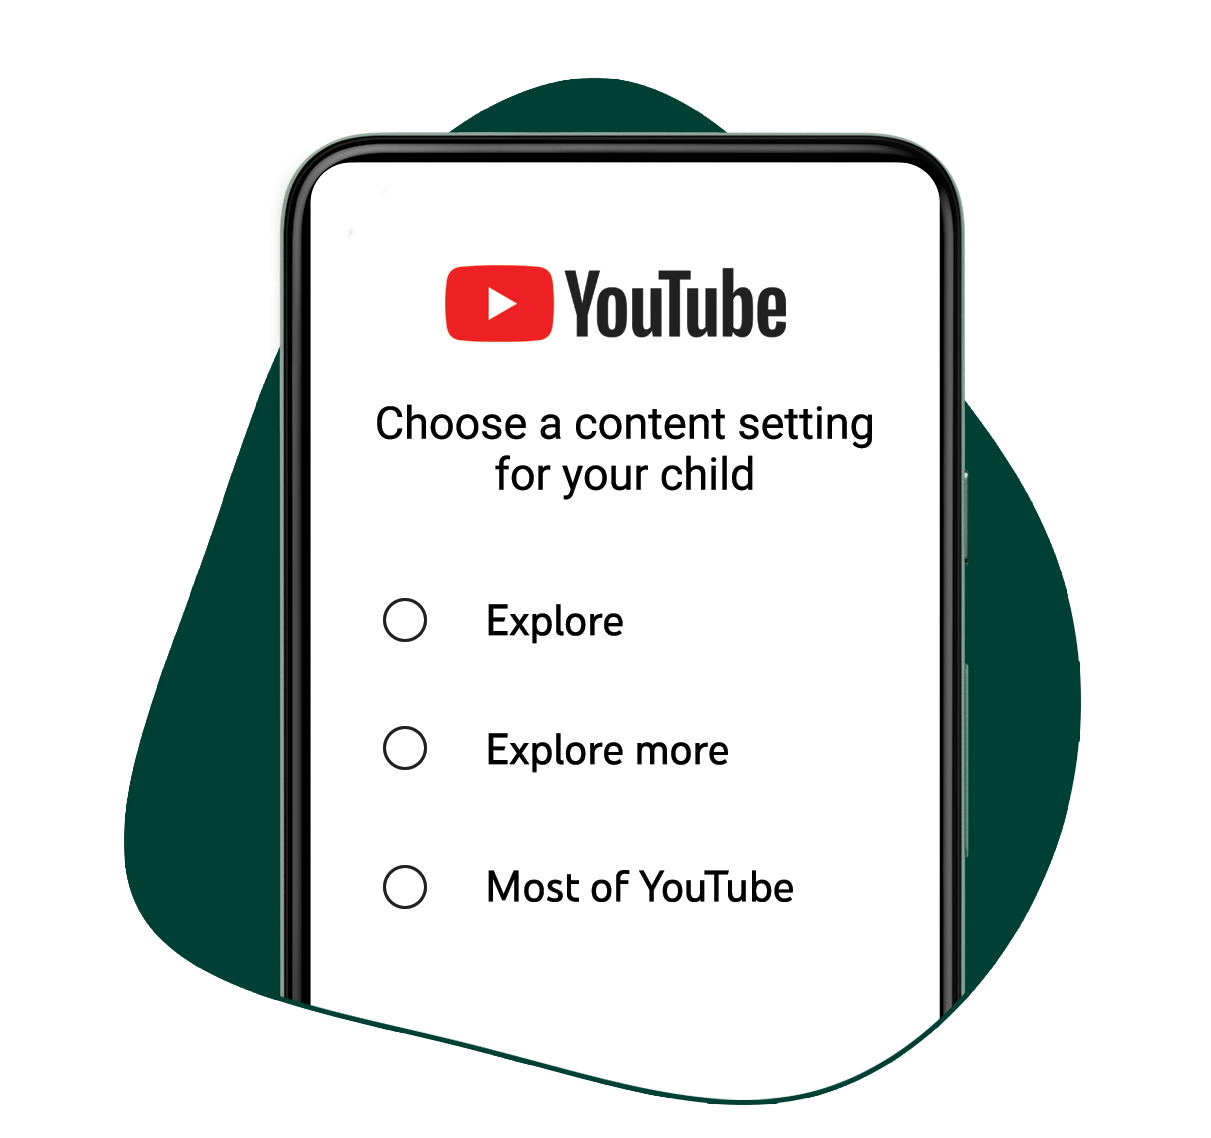 A new choice for parents of tweens and teens on YouTube supex_icons_contentsettings_EN_ZVtah85.png